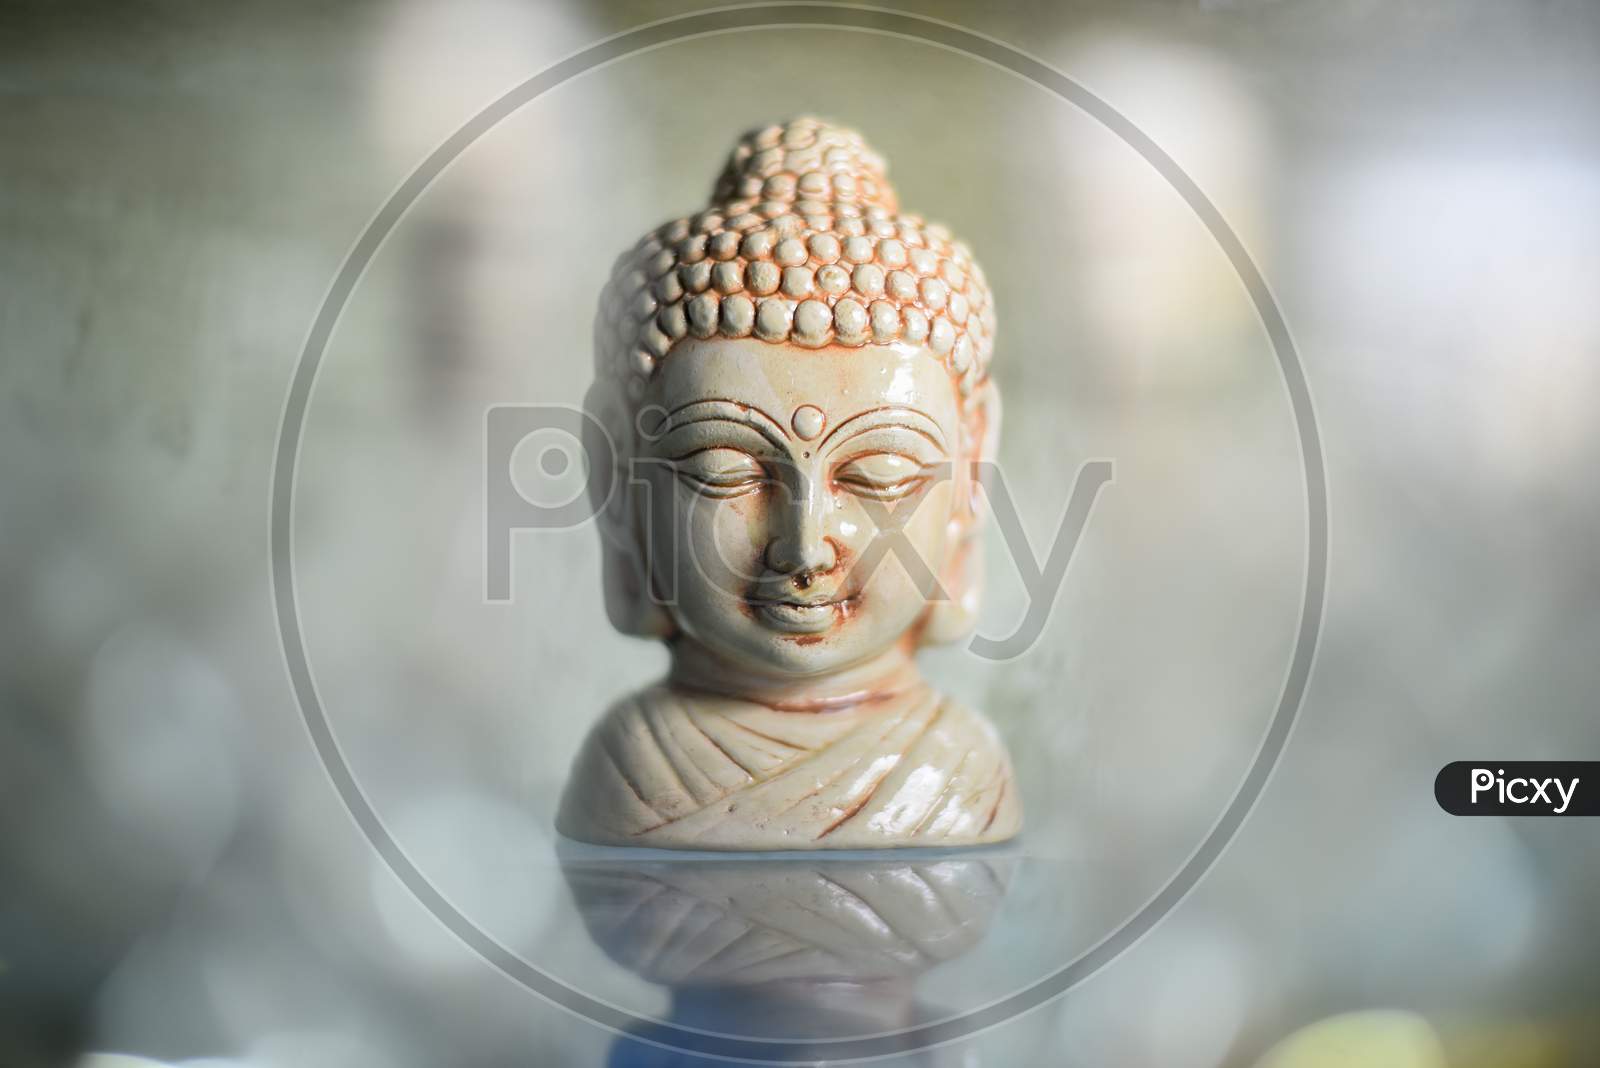 Golden Buddha statue close up .Siddhartha bronze statue. Close up of Buddha beautiful serene face with closed eyes. Best meditation inspiration image or mindfulness background.Copy space.